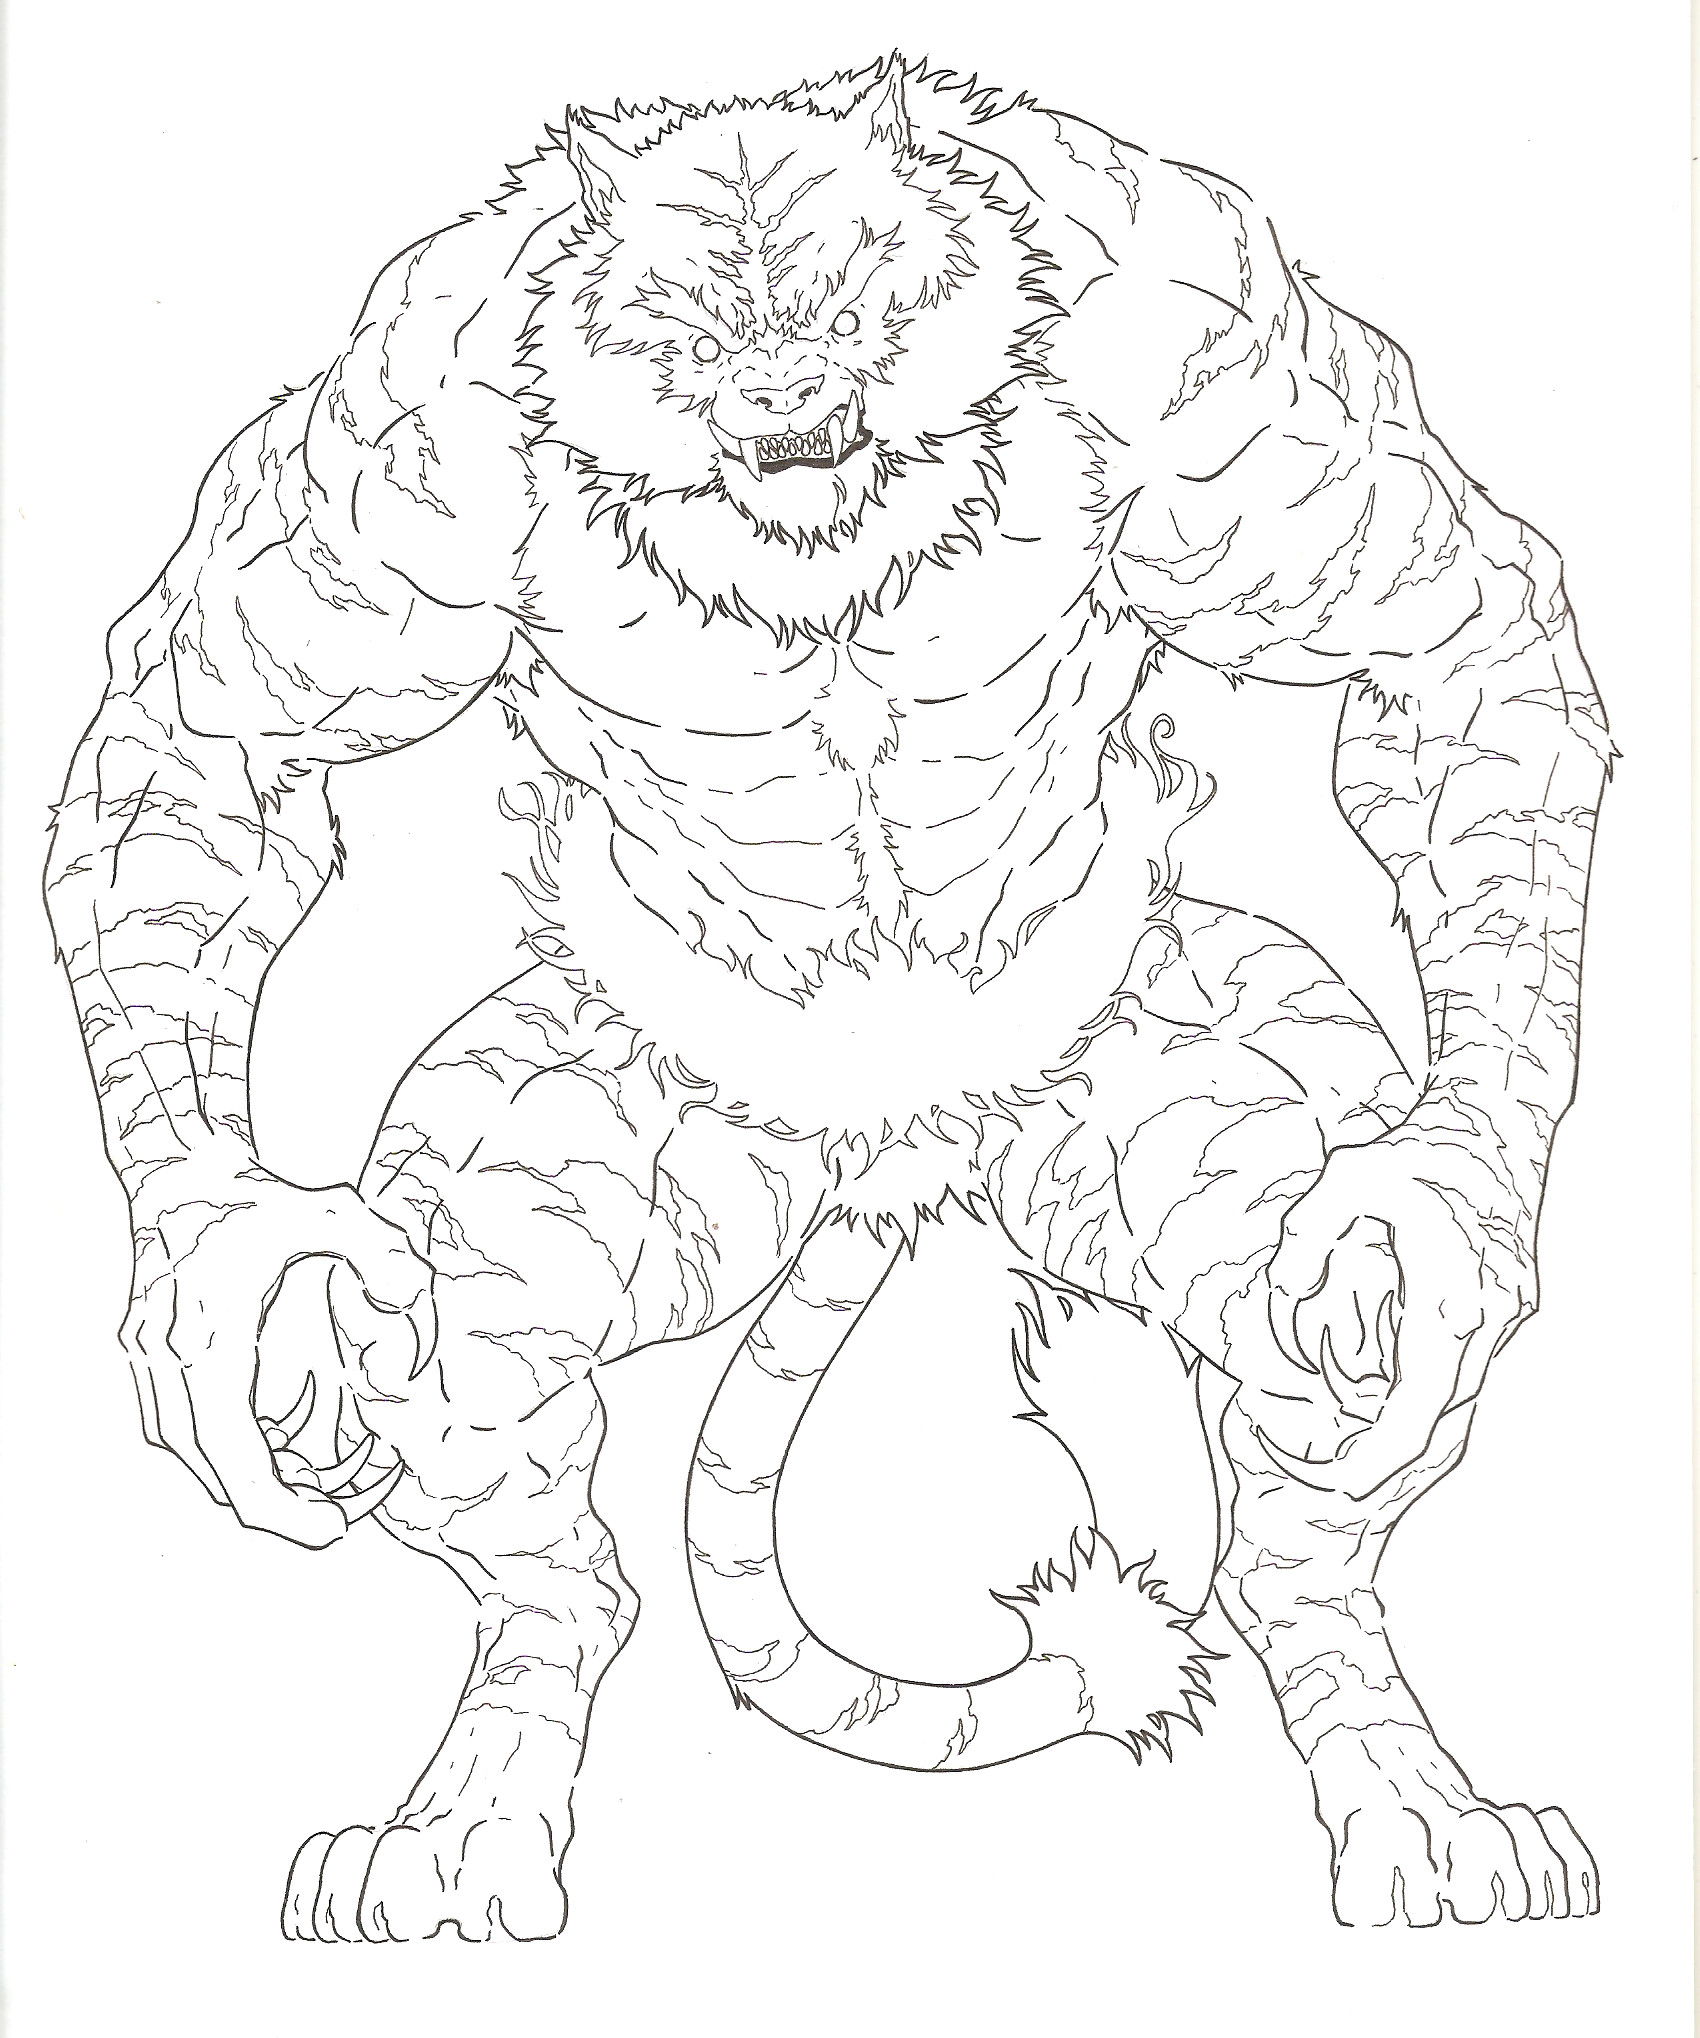  Incineroar  Coloring  Pages  Coloring  wall